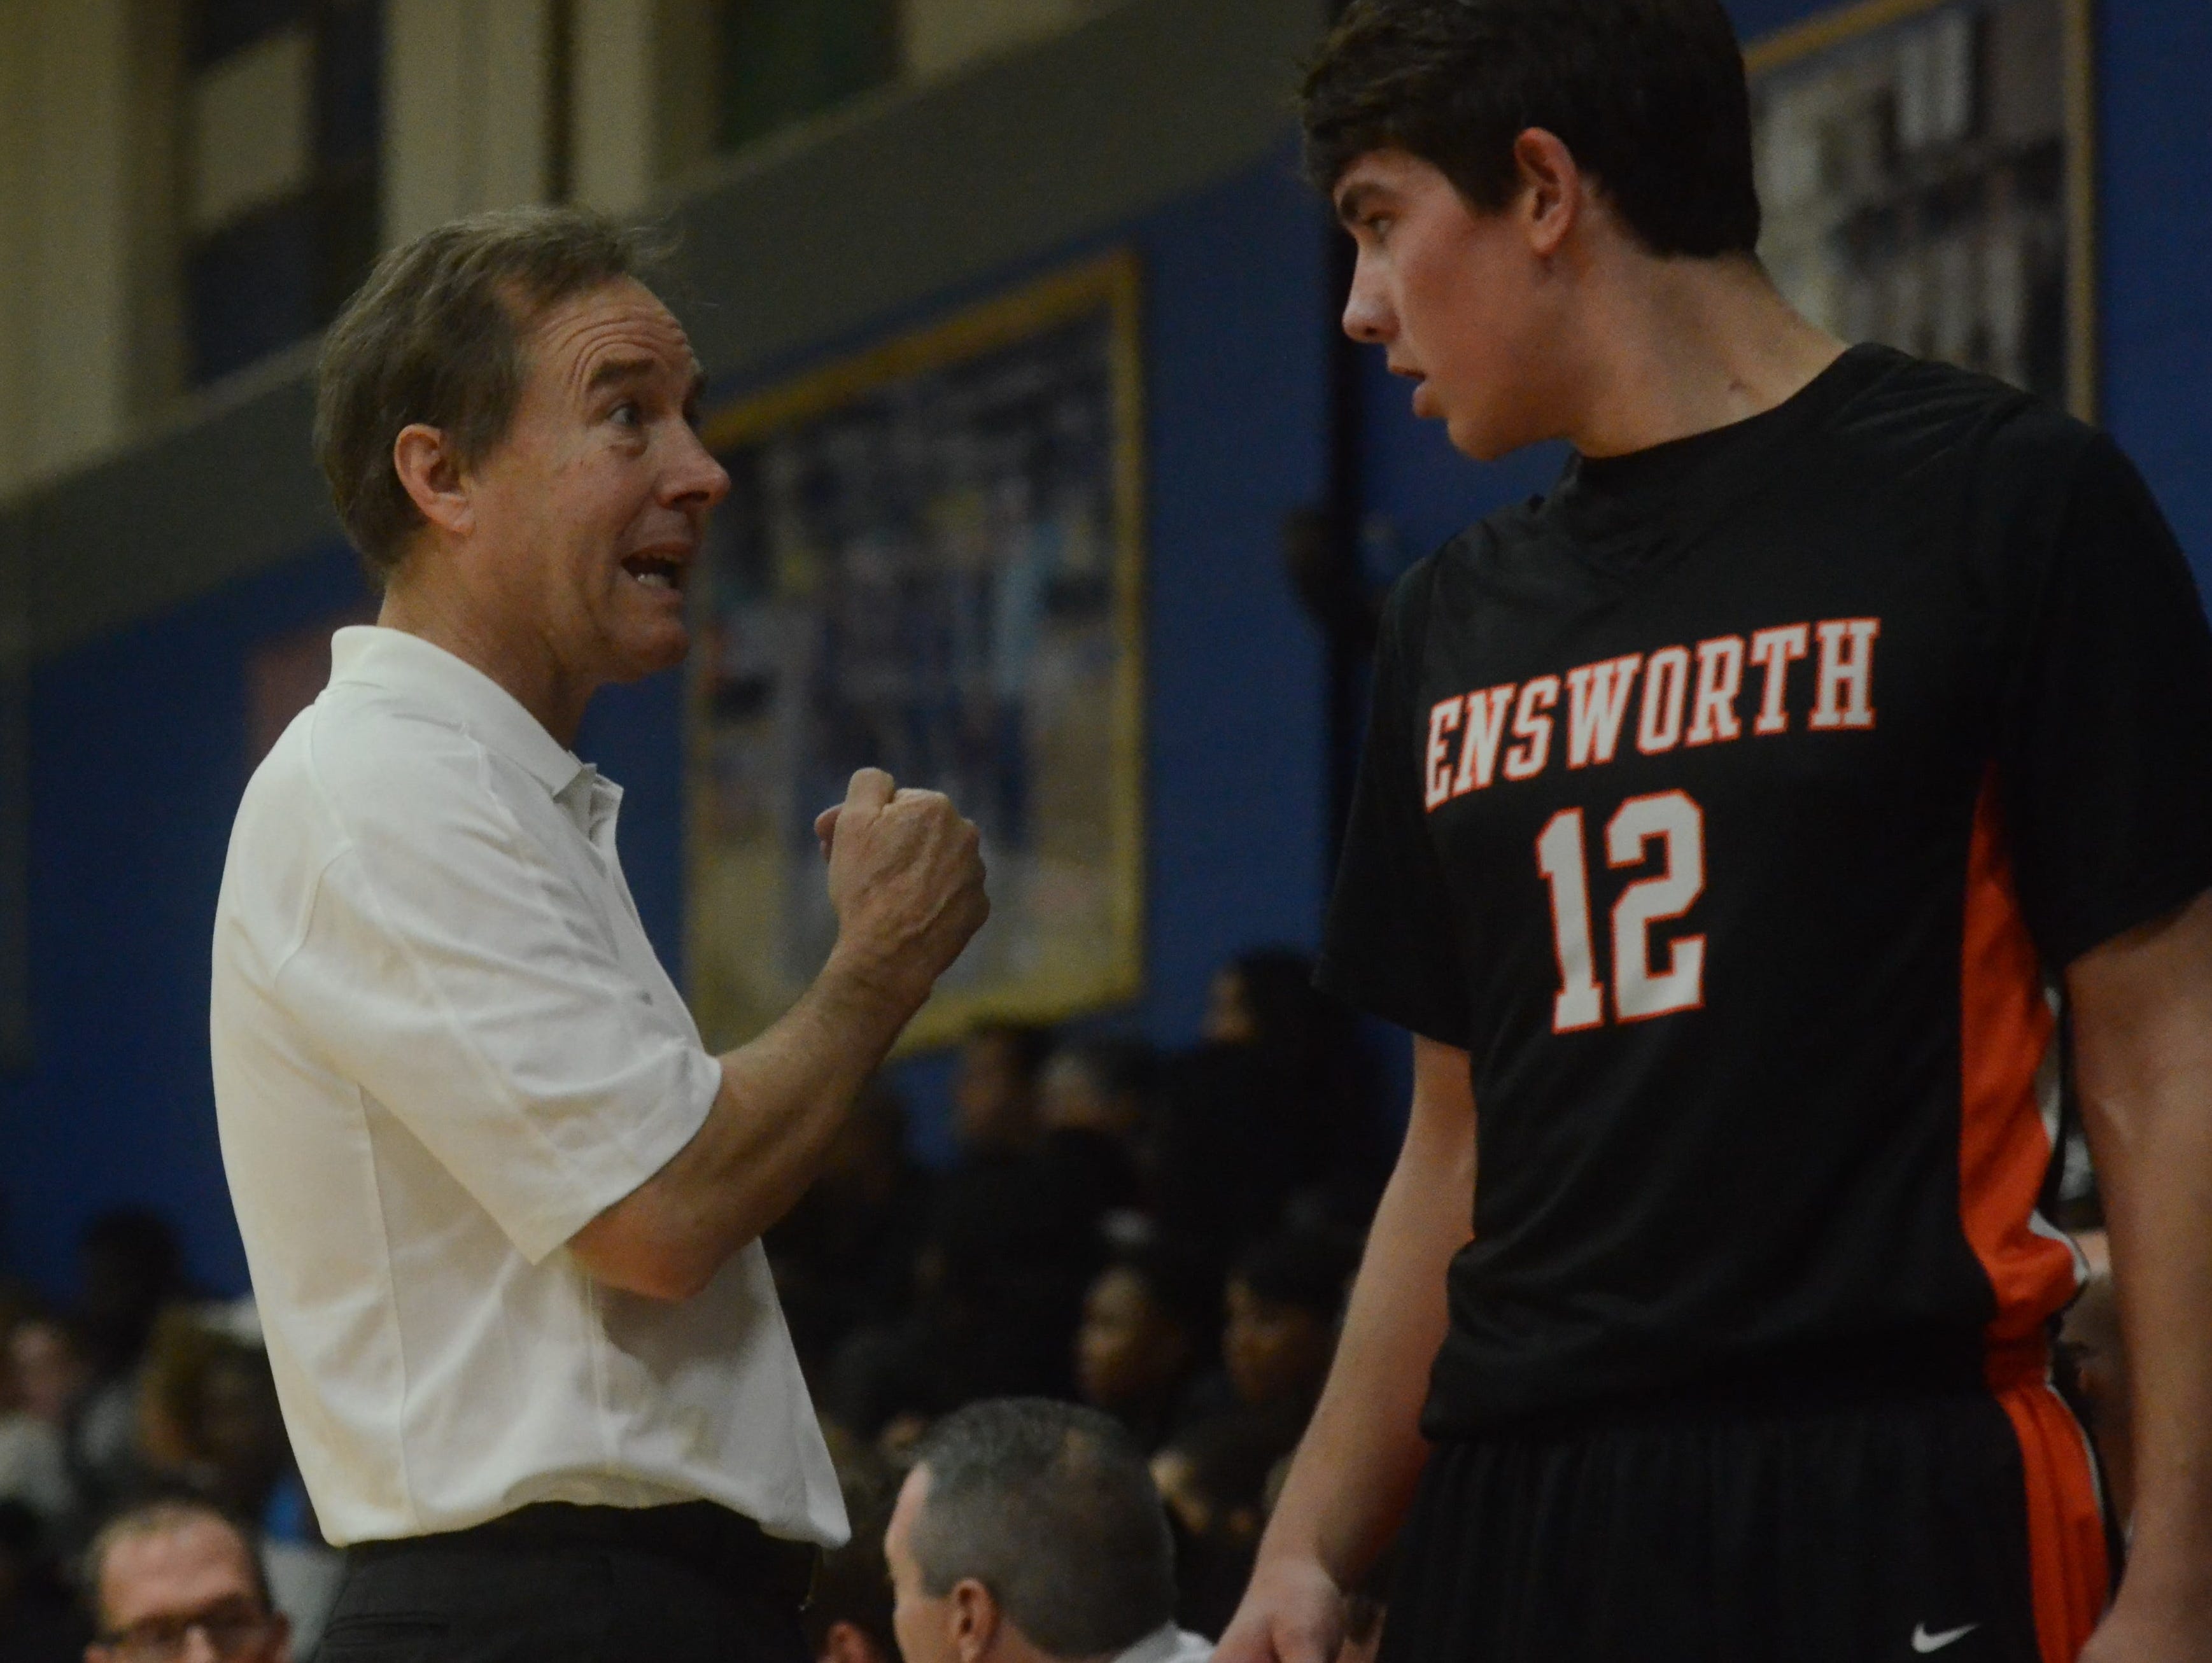 Ensworth coach Ricky Bowers talks to Jack Zager during the first half of Friday’s game at M.L. King.